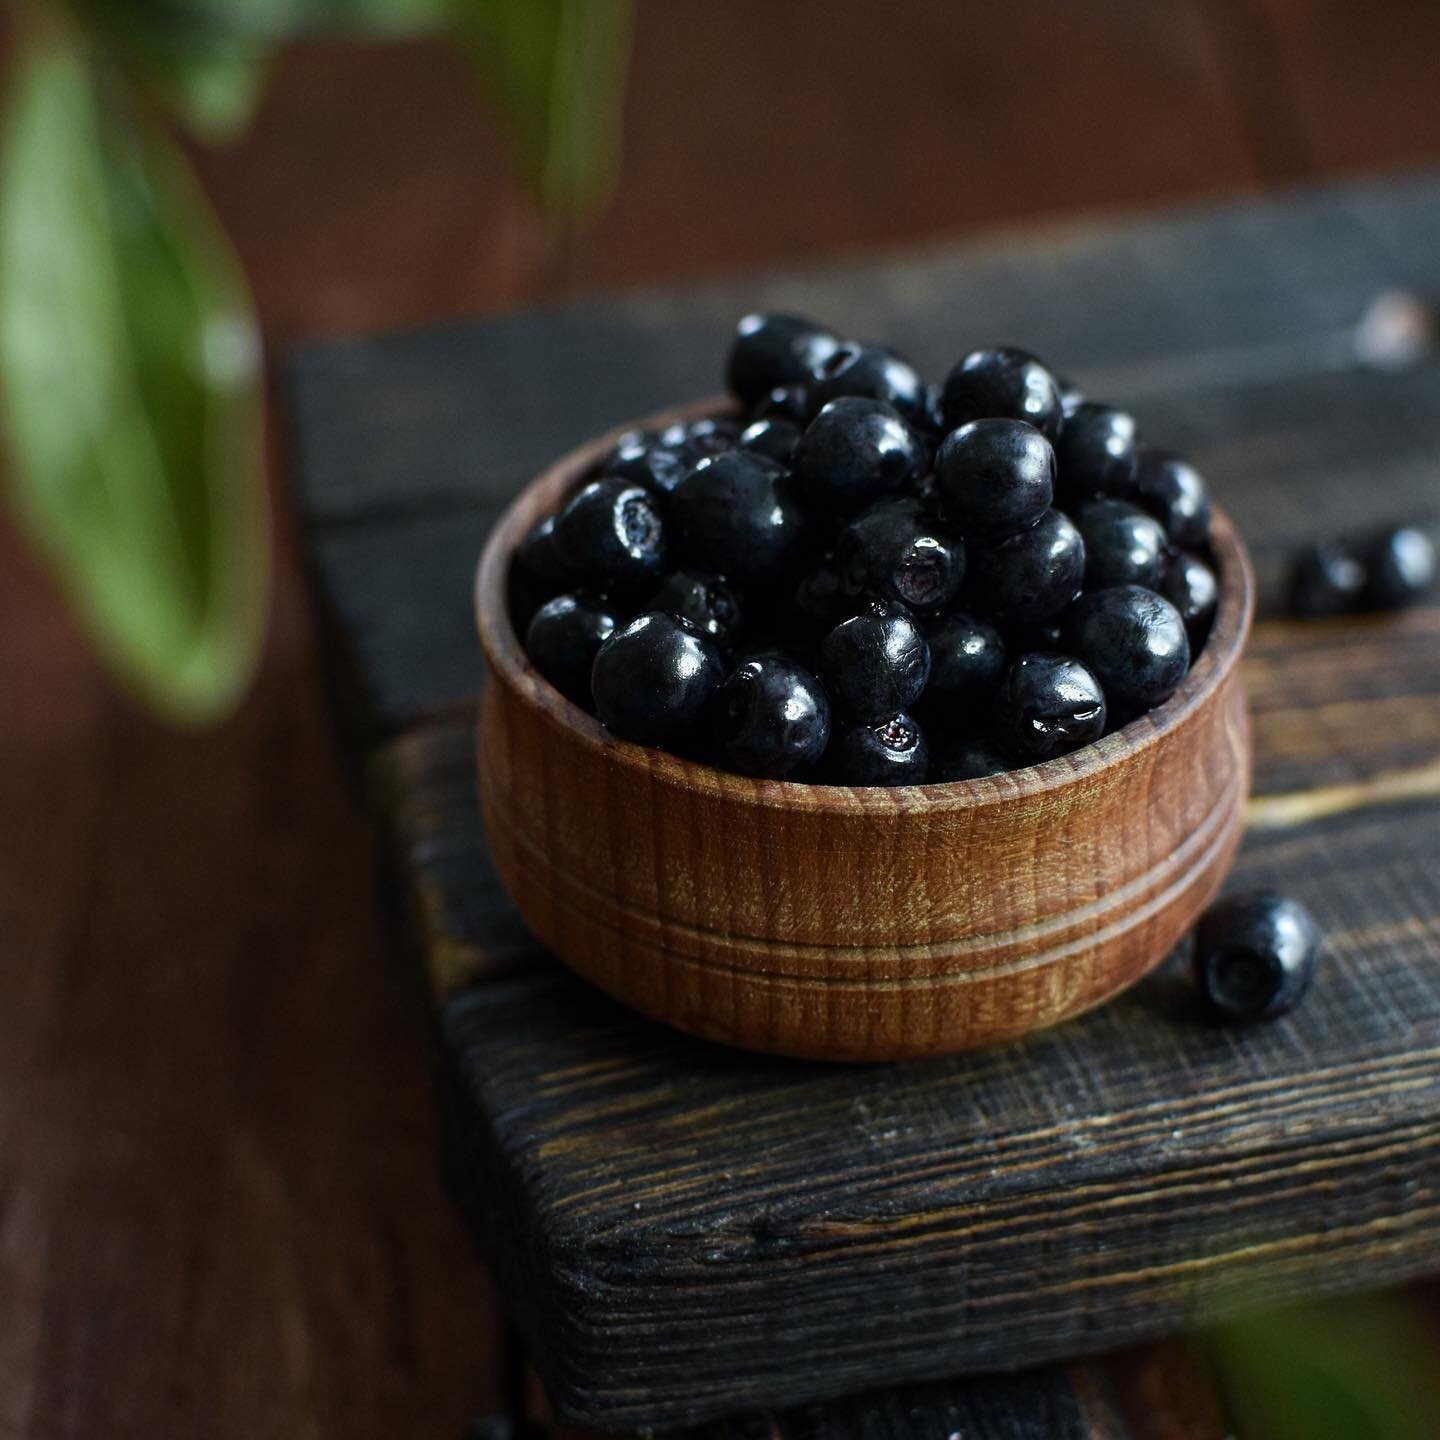 🌿Blackcurrant seed oil features in our Botanic Body Oil and the thing I love most is that the oil we use is a byproduct of beverage industry. 

🖤After the berries have been used to create fruit drinks, the leftover seeds give an oil which is is one